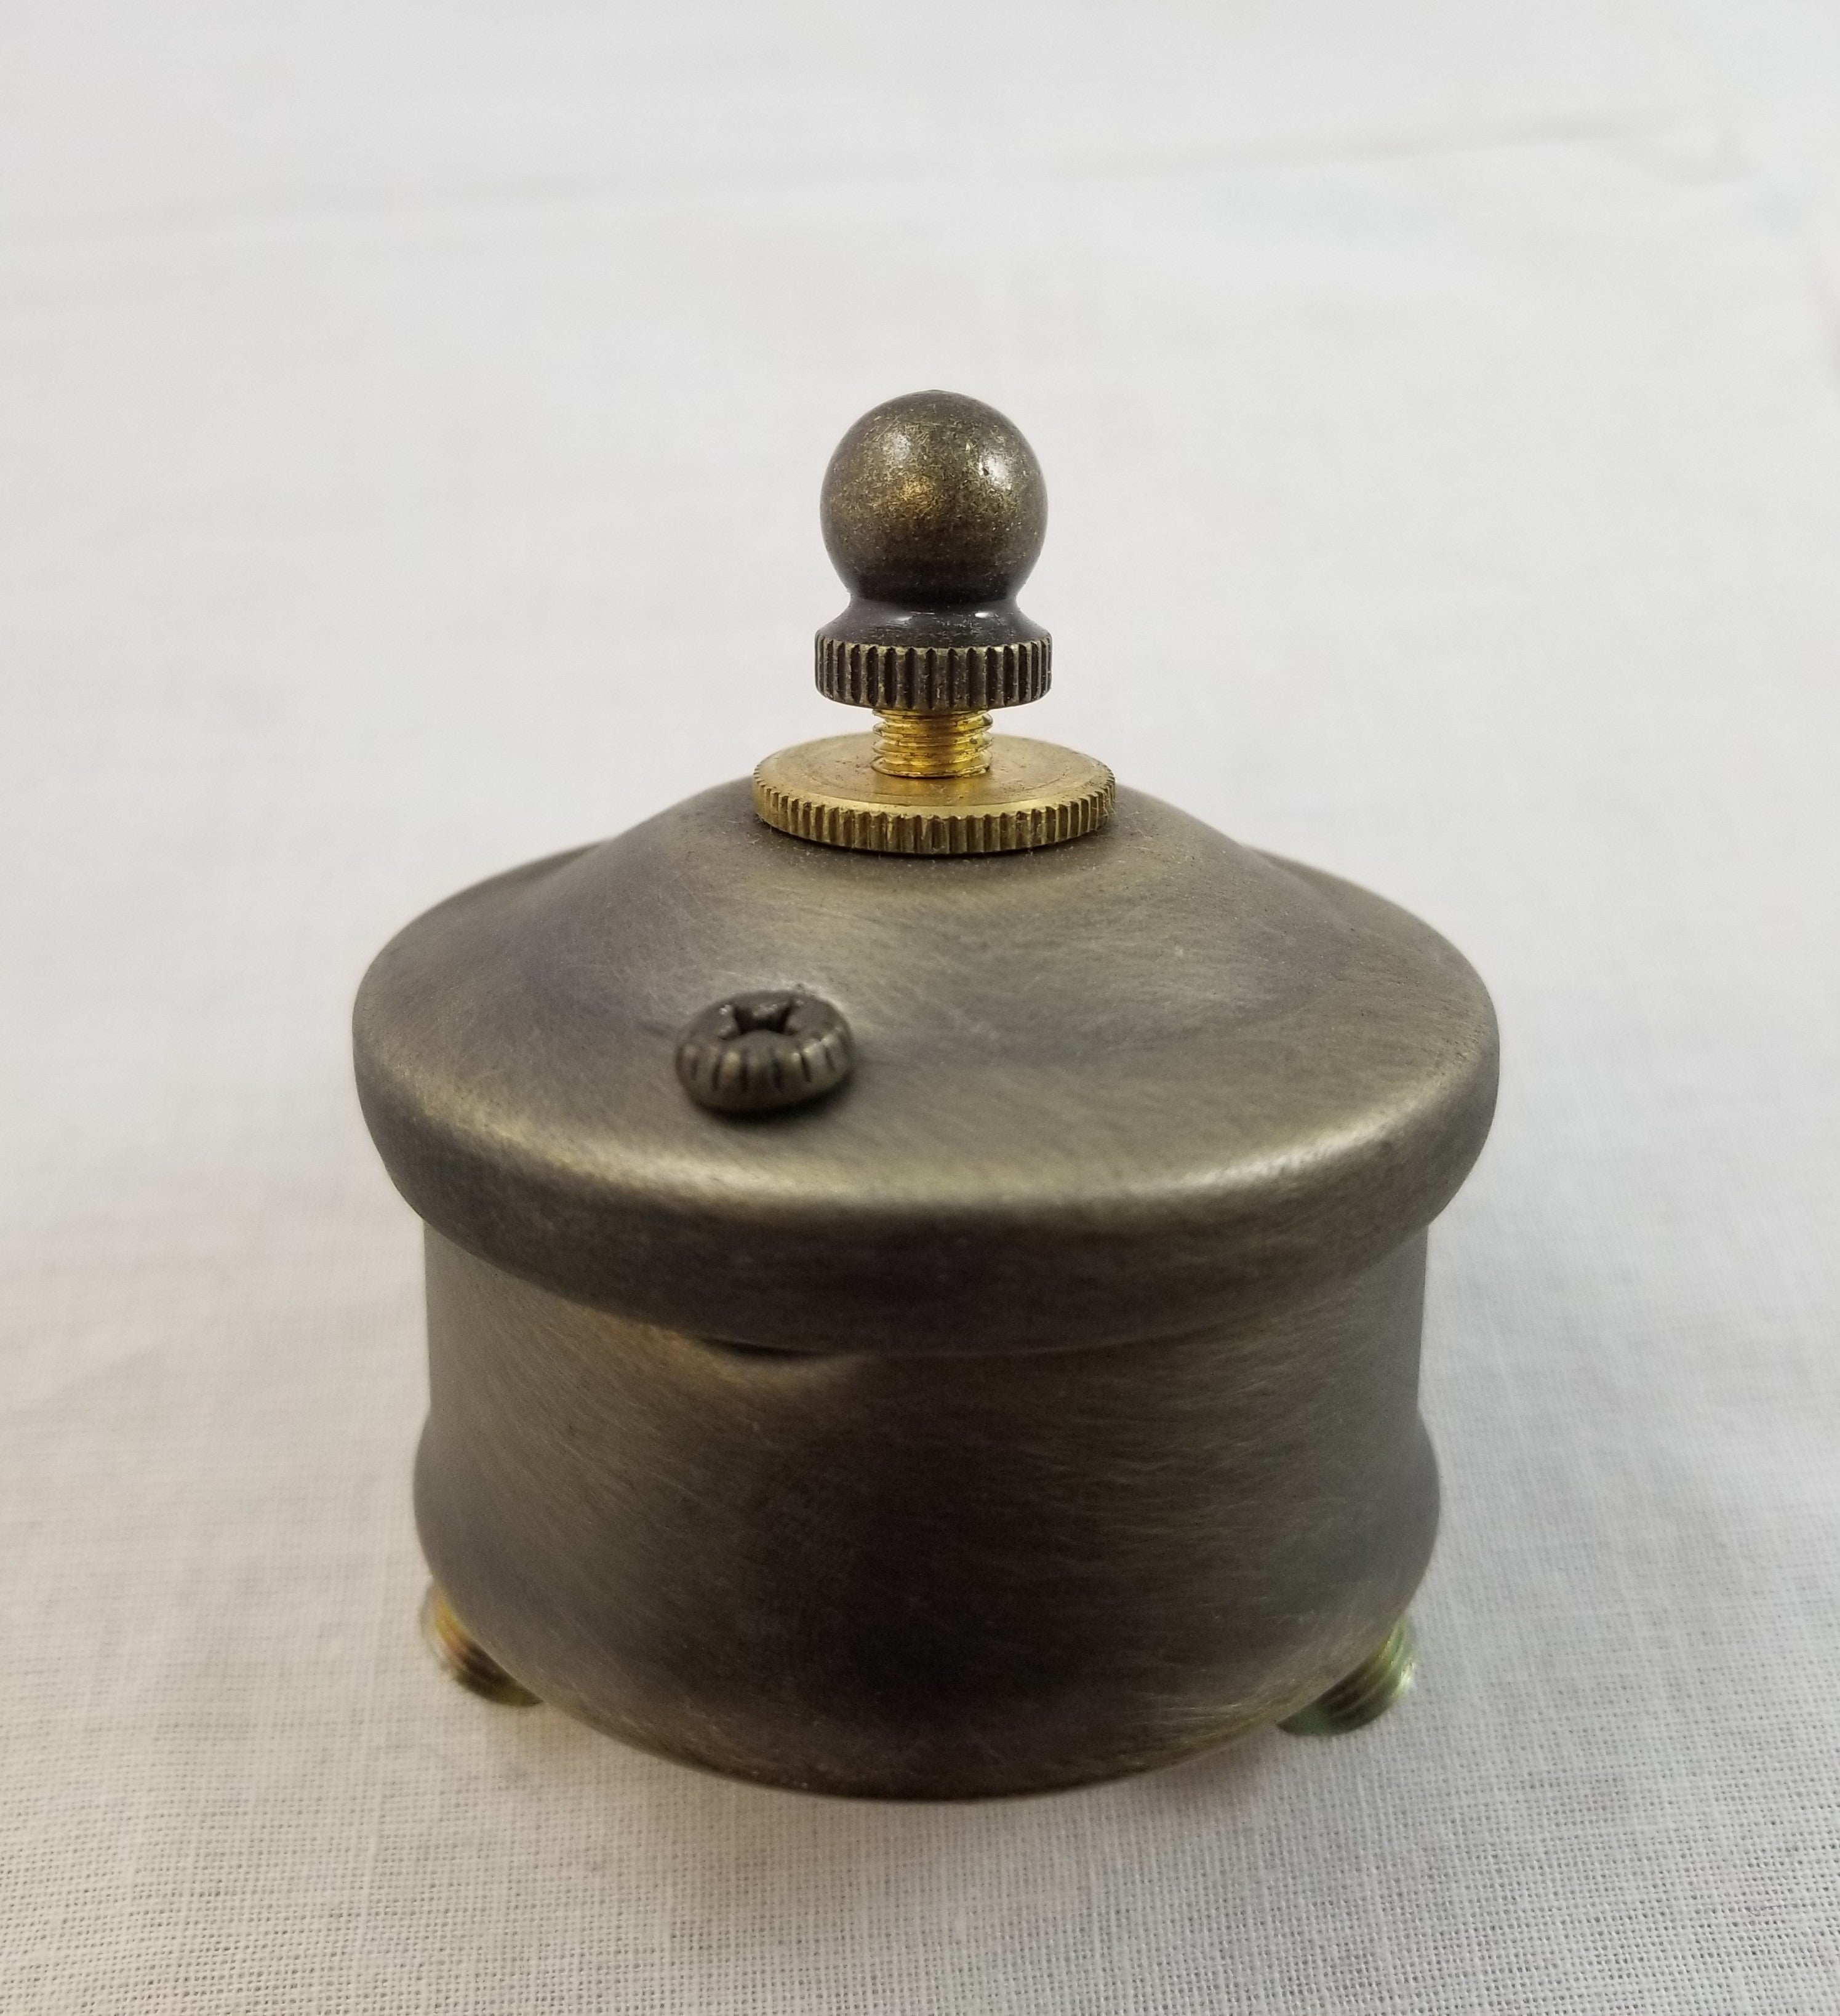 Cluster Head - Antique Brass Finish - Bottom Tapped 1/8 IP - w/ Finial